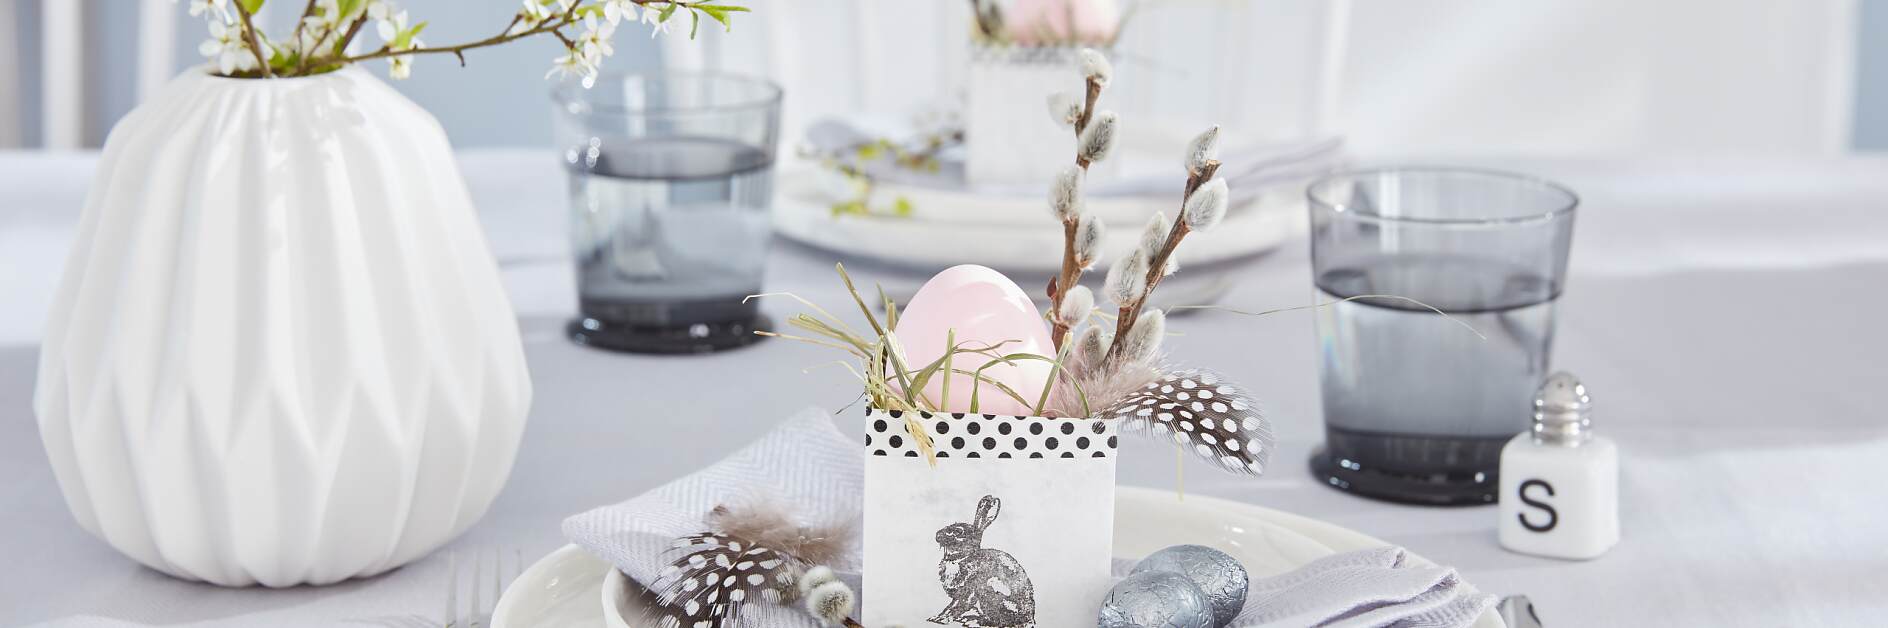 Self-made Easter Decoration